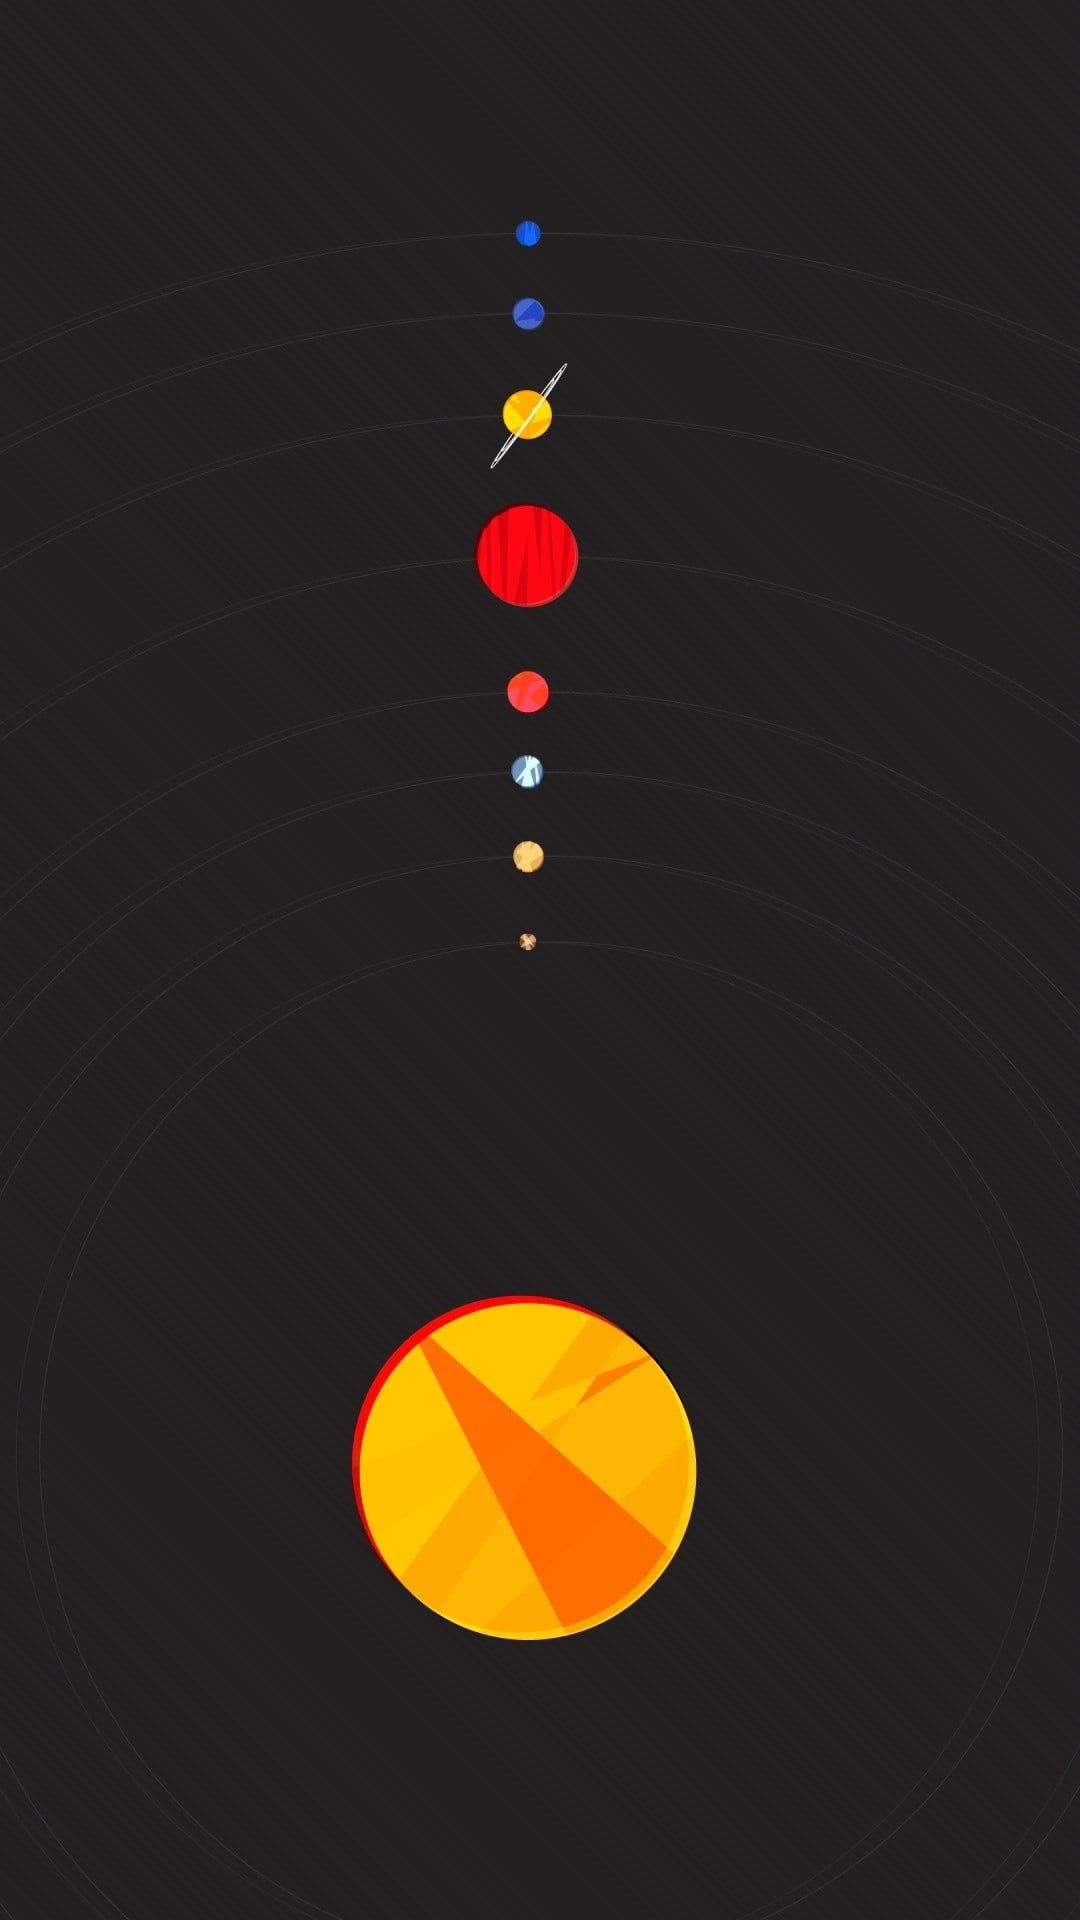 Solar System For iPhone Wallpapers - Wallpaper Cave